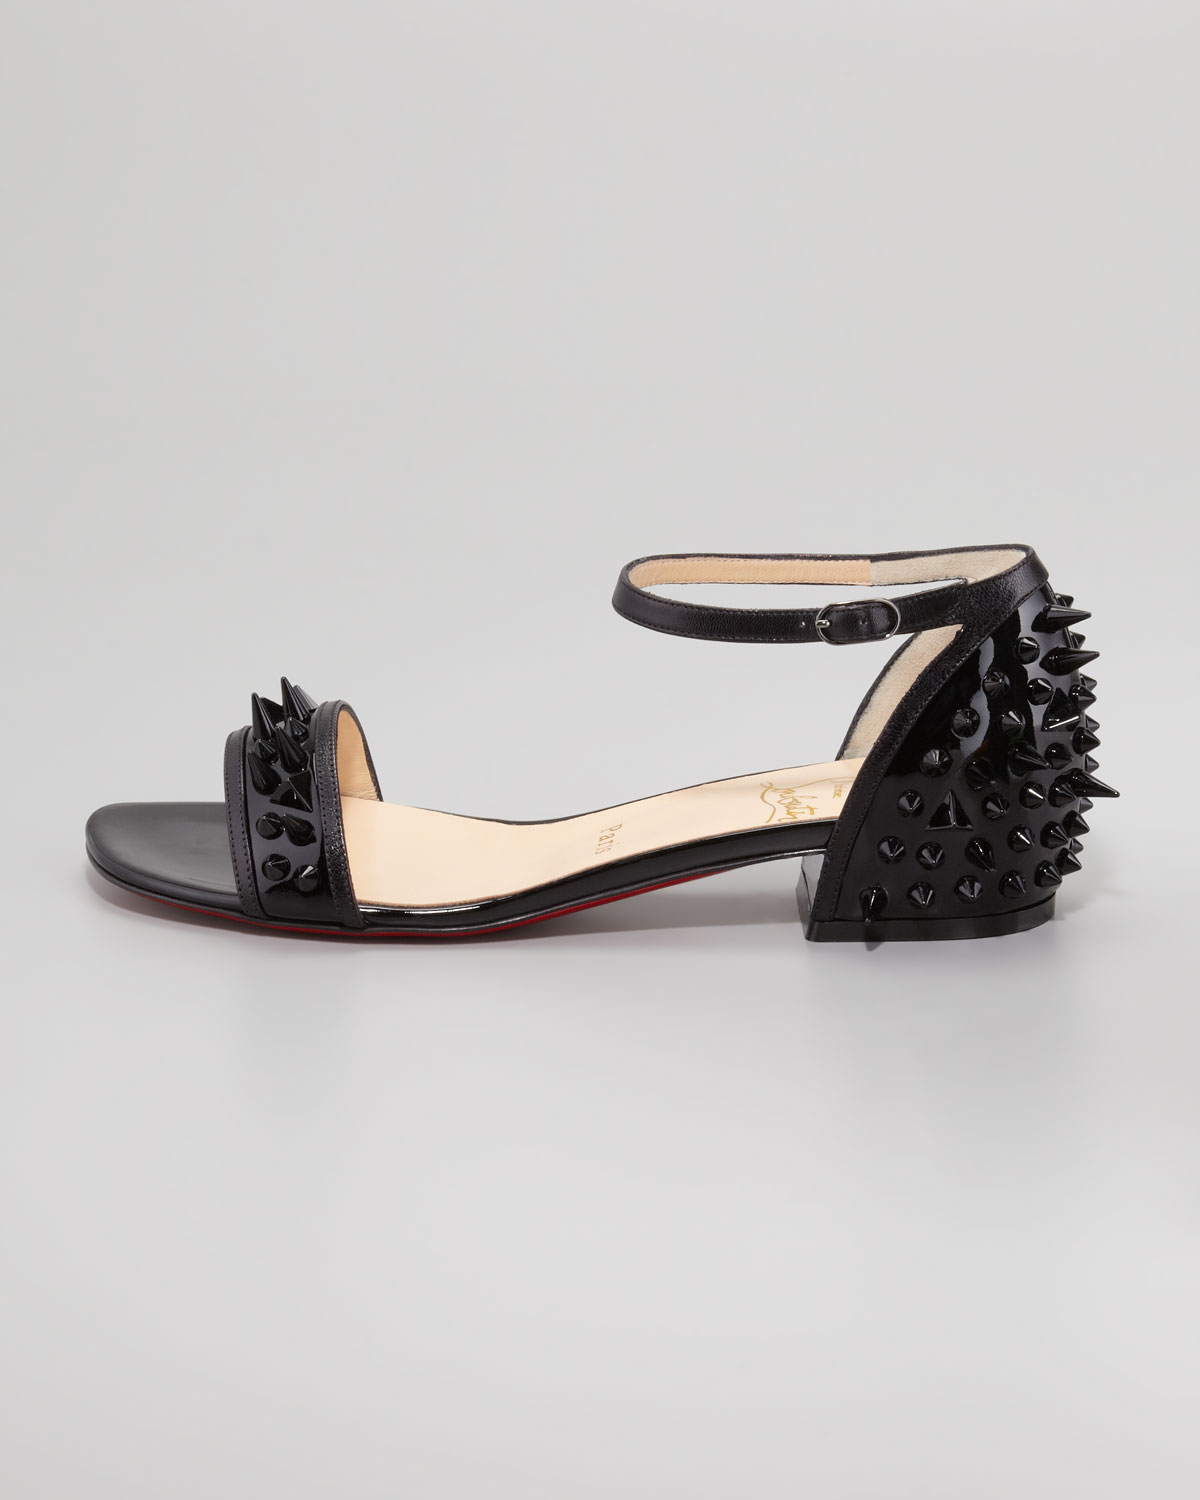 christian louboutin Druide Spike sandals | Boulder Poetry Tribe